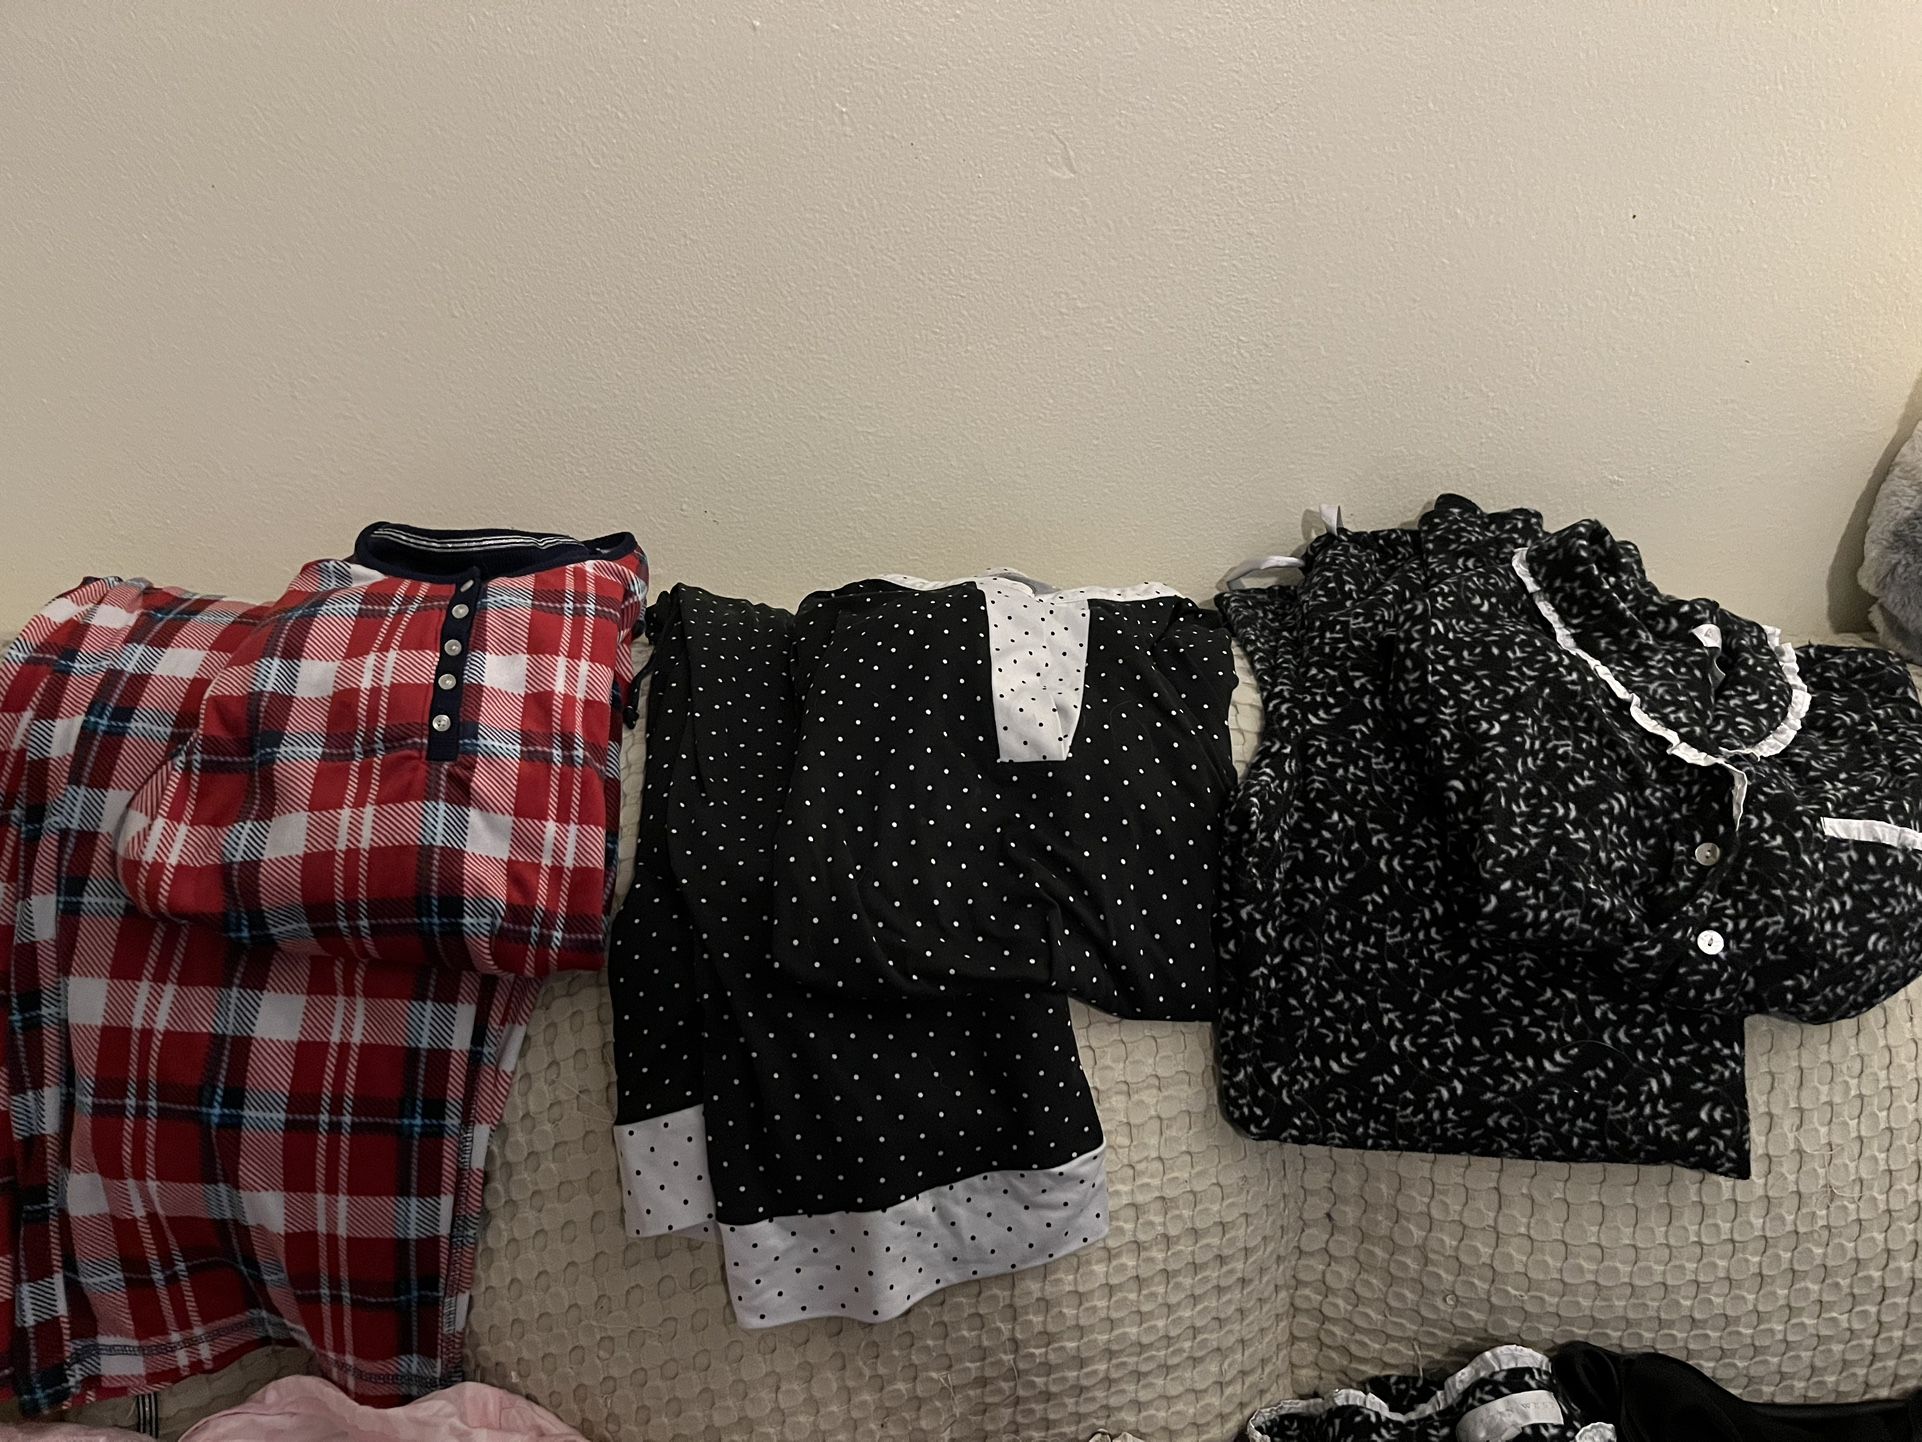 Women’s Medium Pajamas $4 Each Or All 10 Pairs For $35